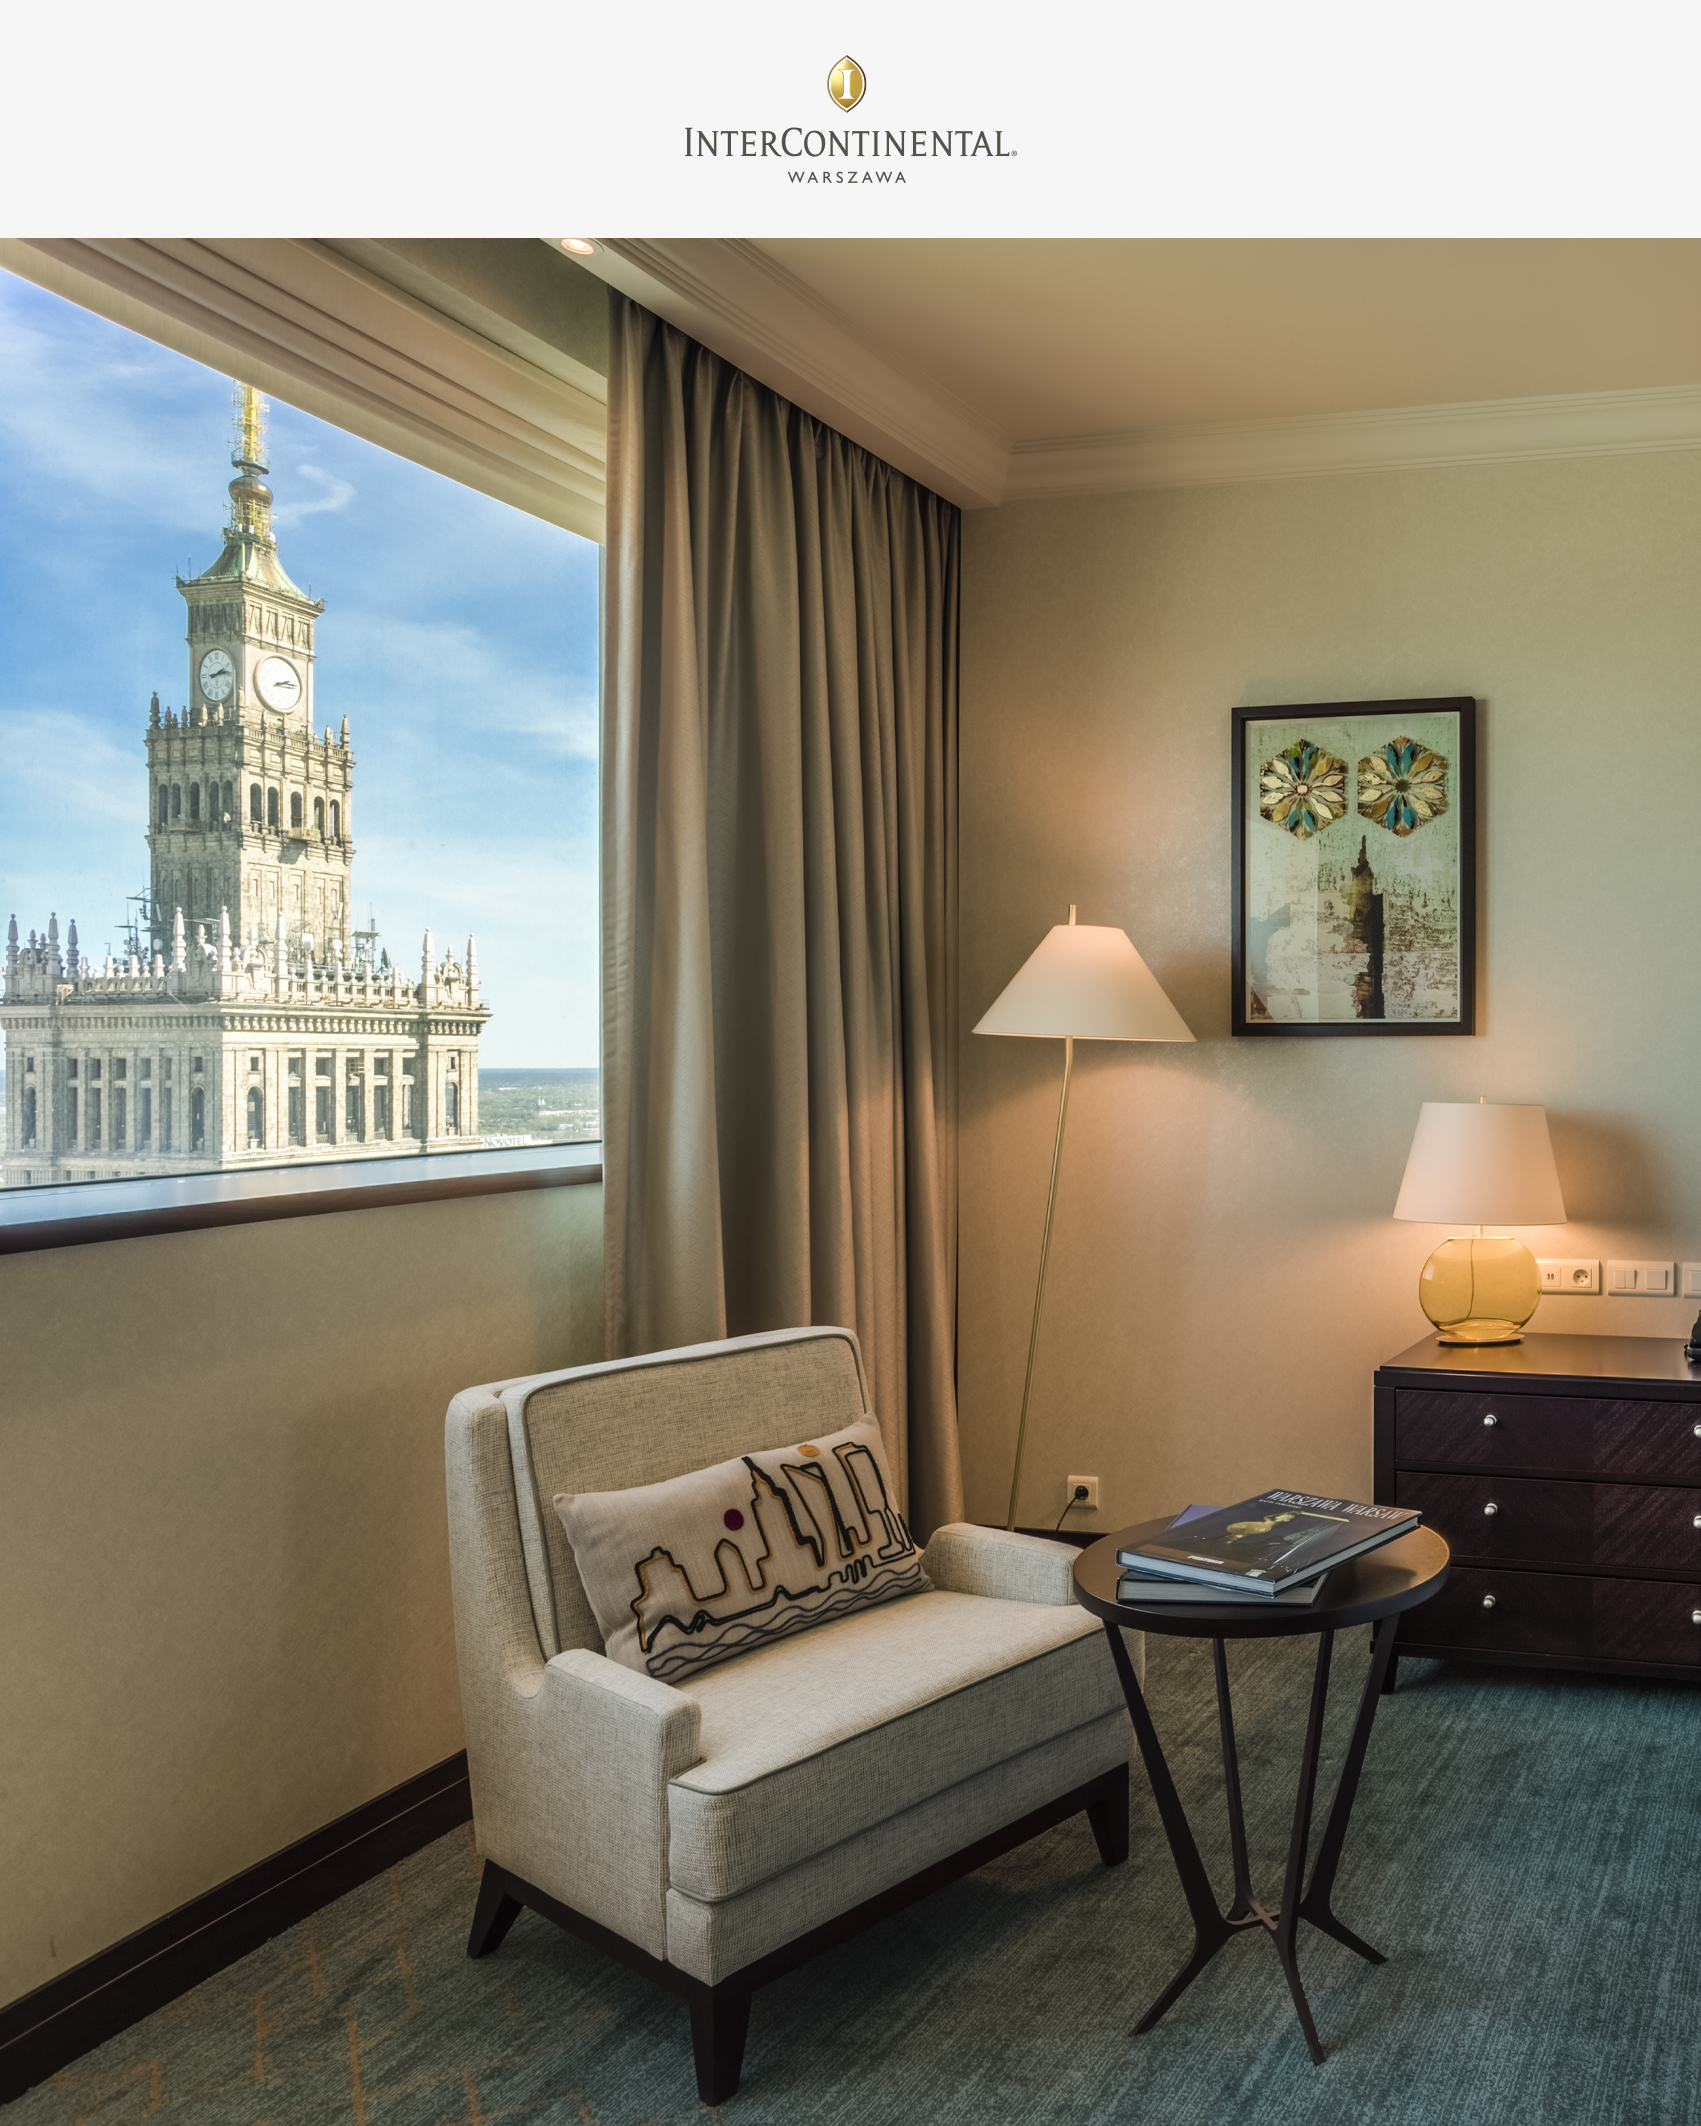 Stay in a Classic Room on a High Floor with a view of the Palace of Culture and Science (2 nights / 2 people)